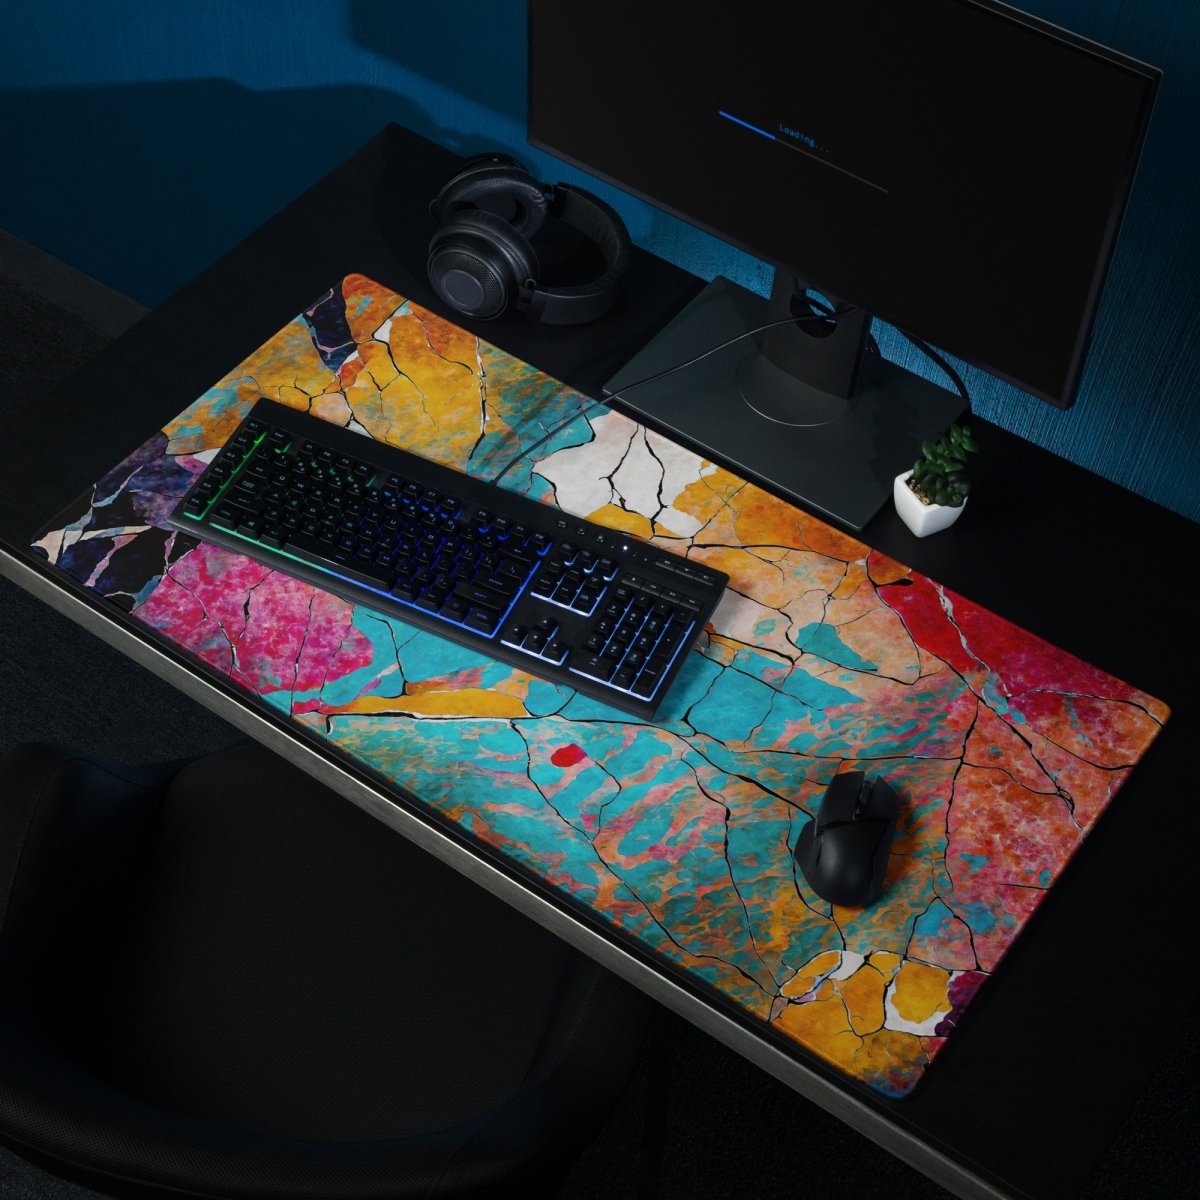 Tinted fissures - Gaming mouse pad - Ever colorful